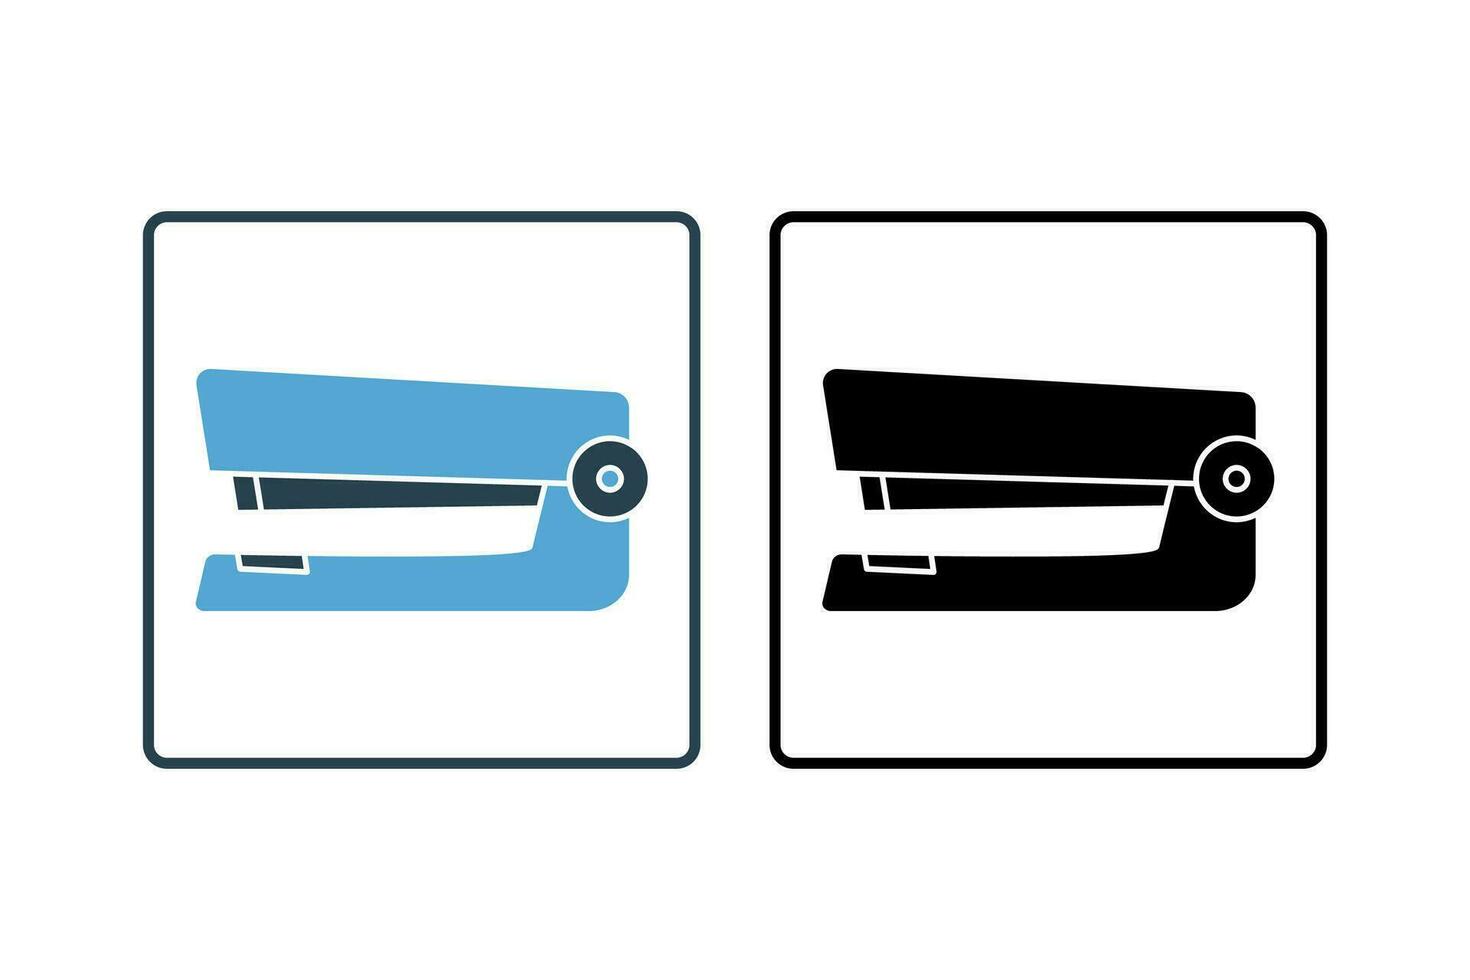 stapler icon. Icon related to stationery. solid icon style. Simple vector design editable